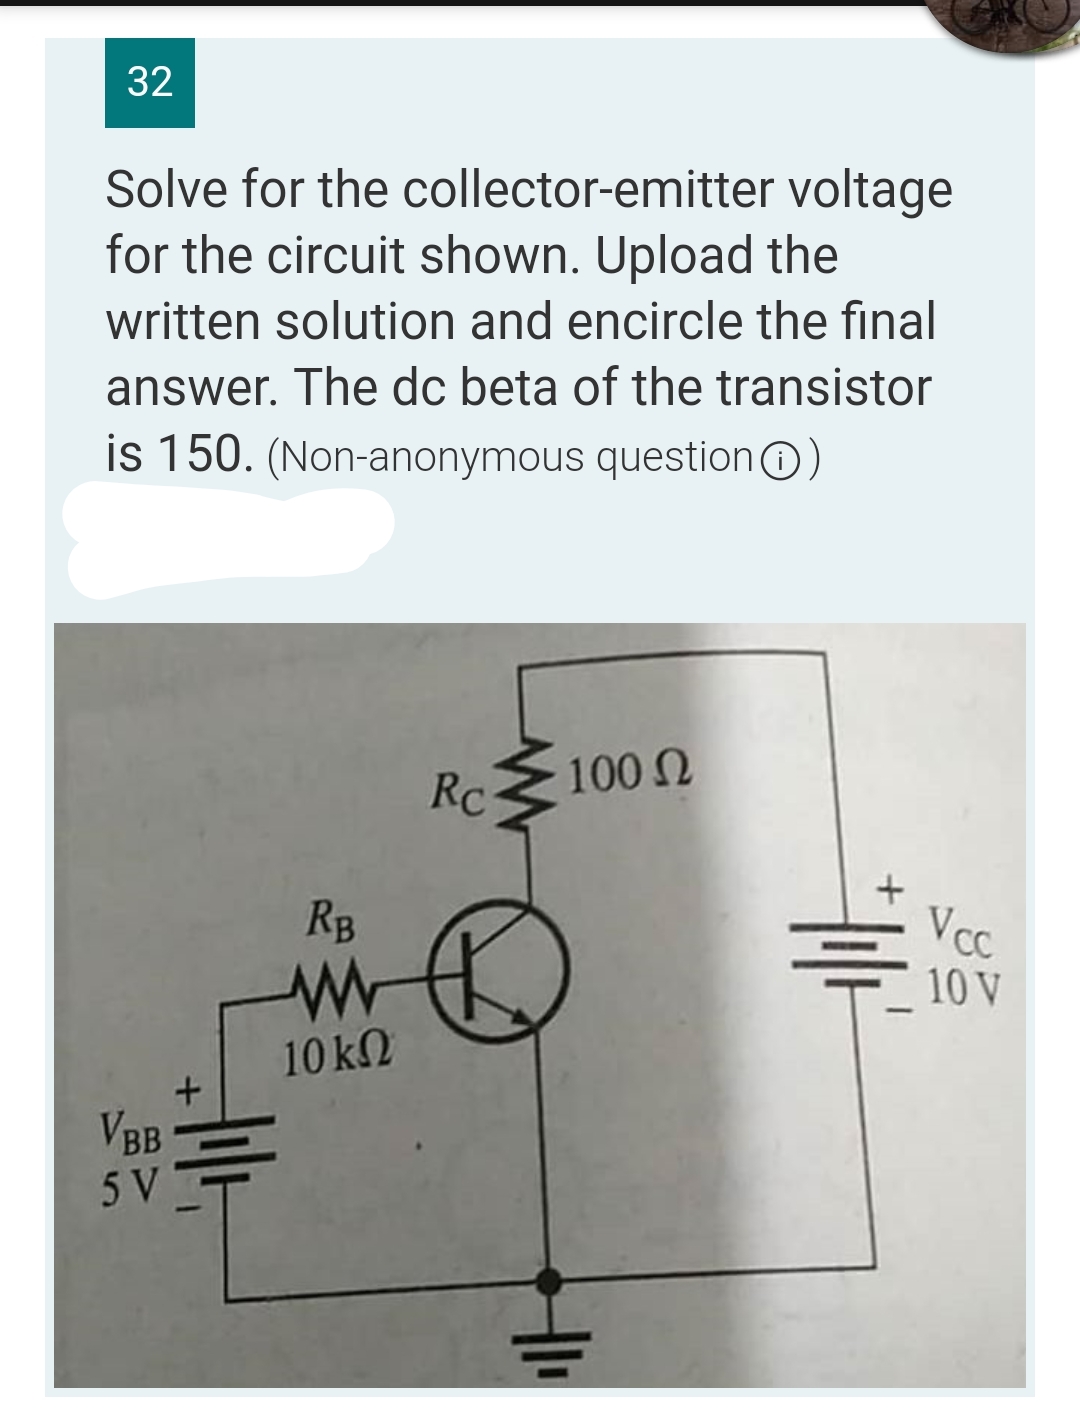 32
Solve for the collector-emitter voltage
for the circuit shown. Upload the
written solution and encircle the final
answer. The dc beta of the transistor
is 150. (Non-anonymous question)
Rc
100 Ω
VBB
5 V
+
Hilt
RB
www
10 ΚΩ
H1₁
+|1/²
Vcc
10 V